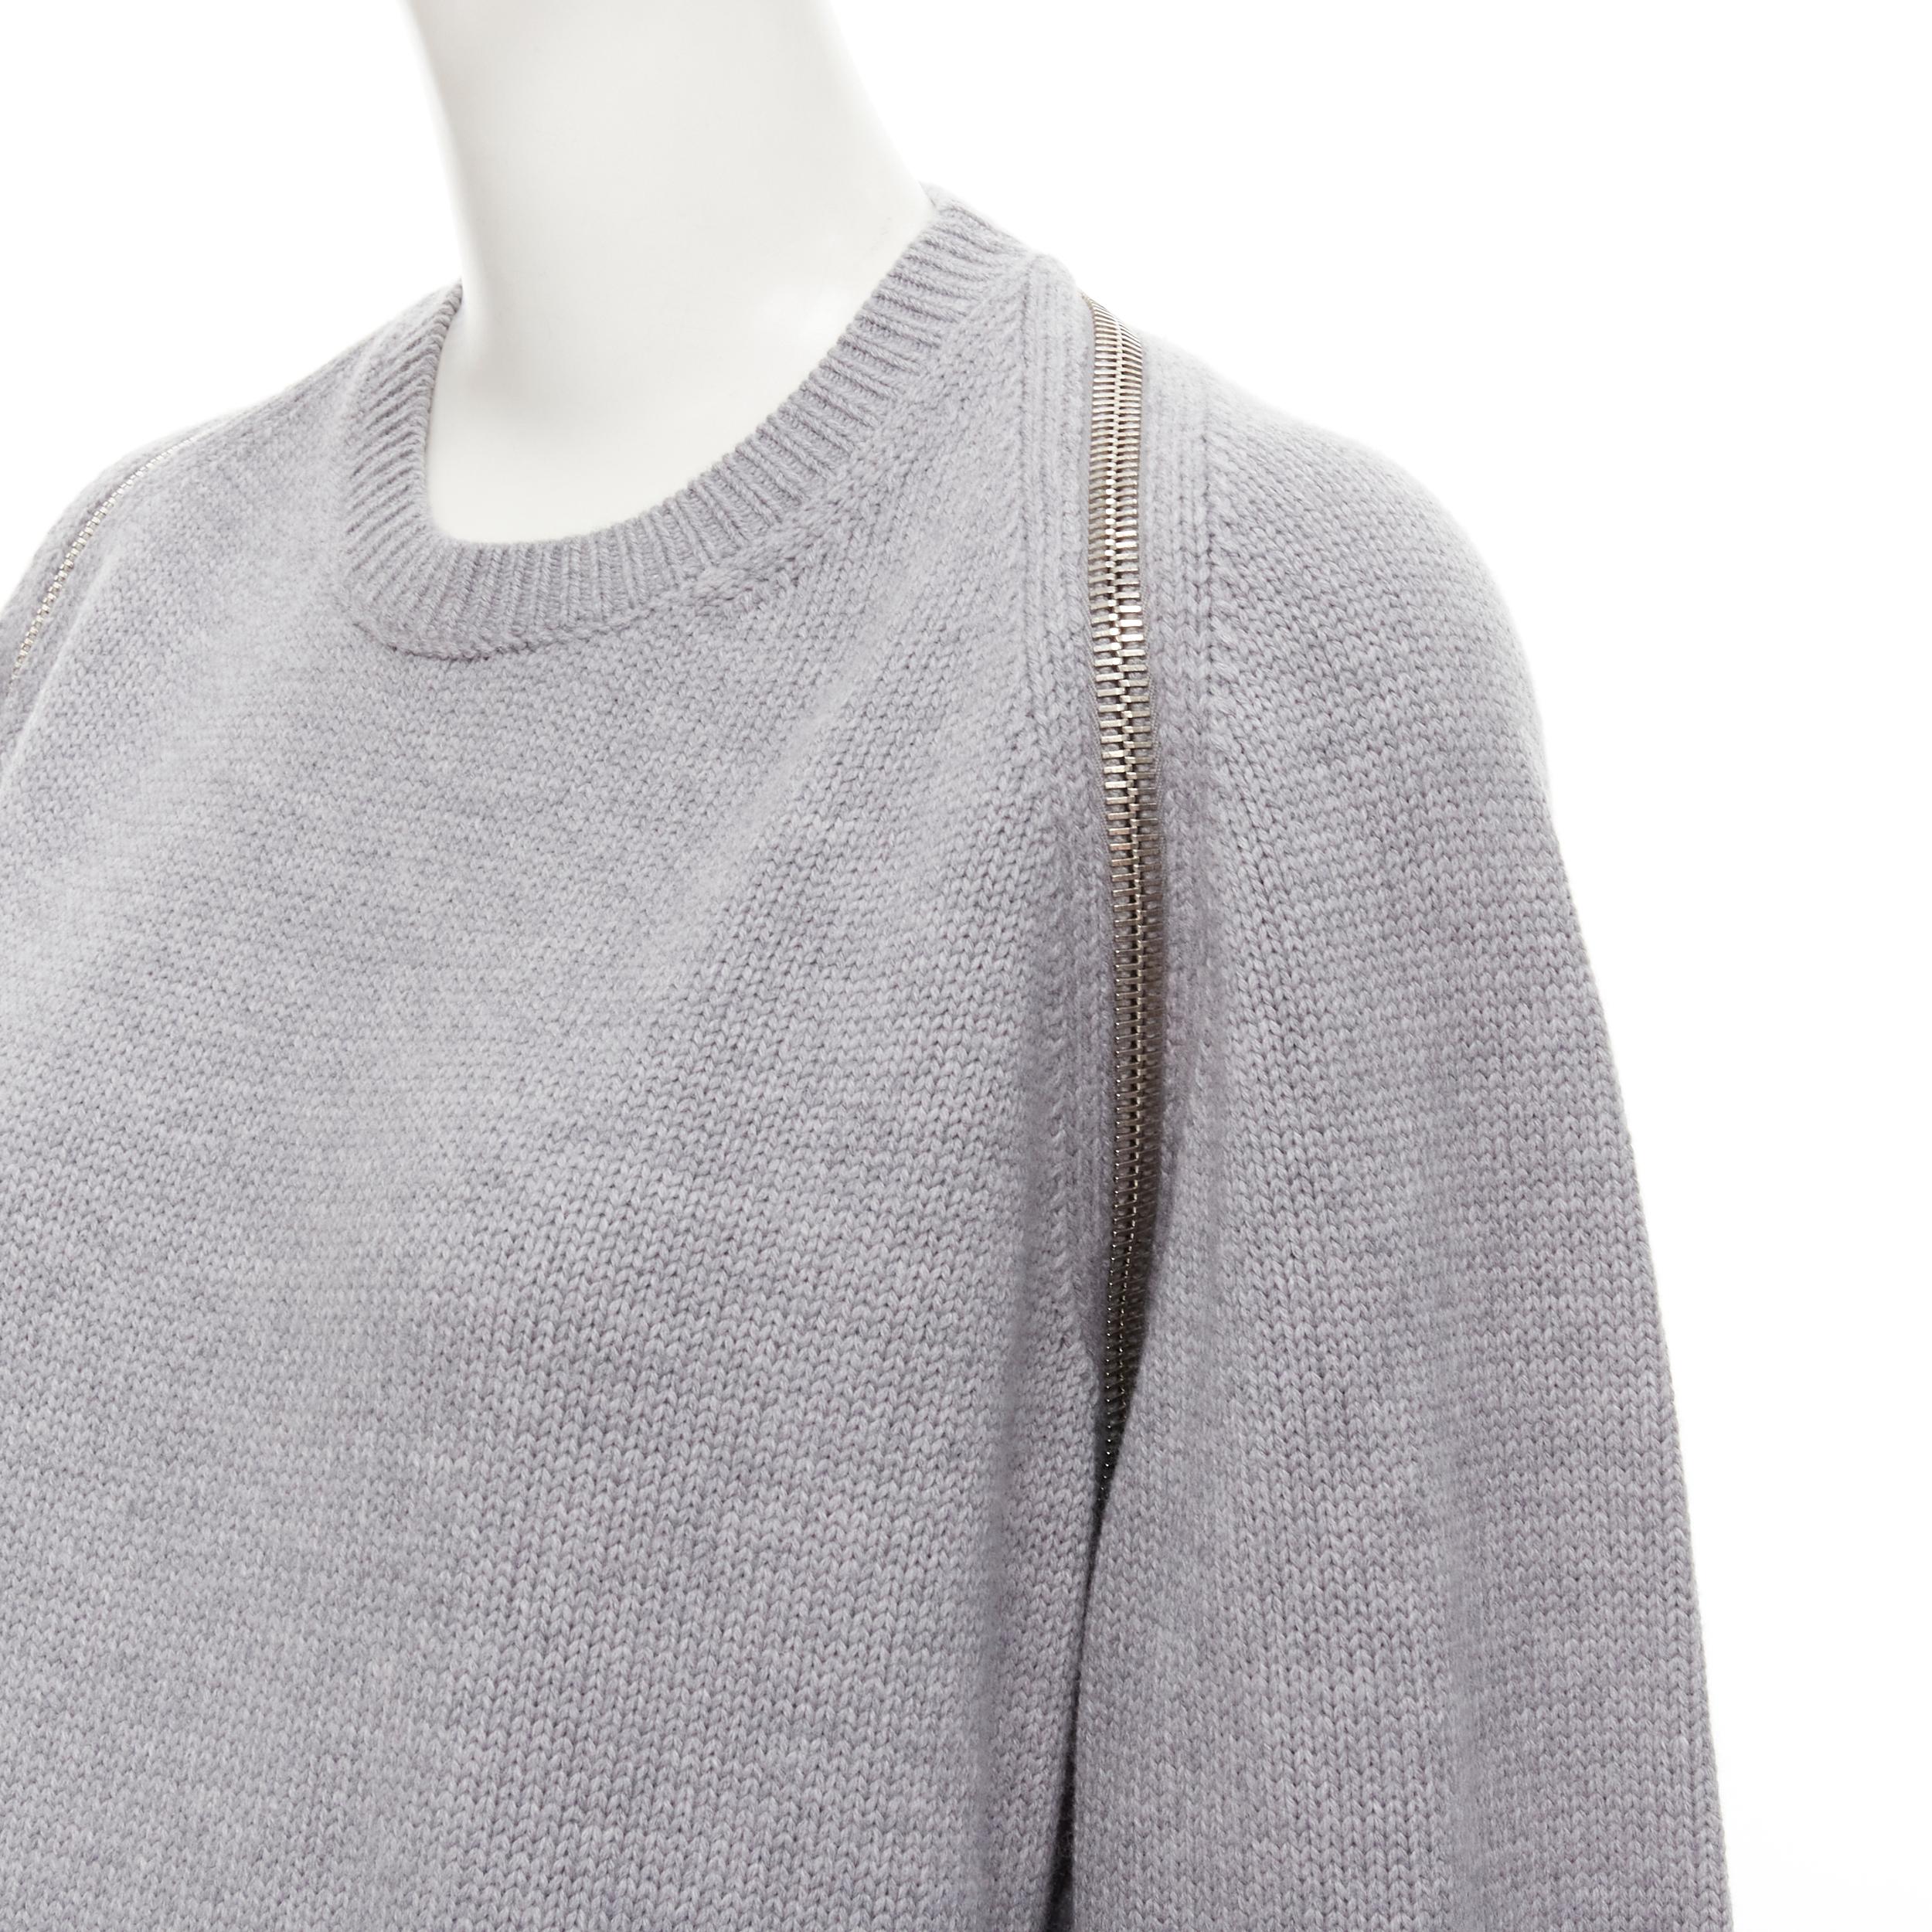 ALEXANDER WANG grey merino wool chunky knit zip trim sweater dress M 
Reference: JYLM/A00004 
Brand: Alexander Wang 
Material: Wool 
Color: Grey 
Pattern: Solid 
Closure: Zip 
Extra Detail: Functional zipper at shoulder 
Made in: China 

CONDITION: